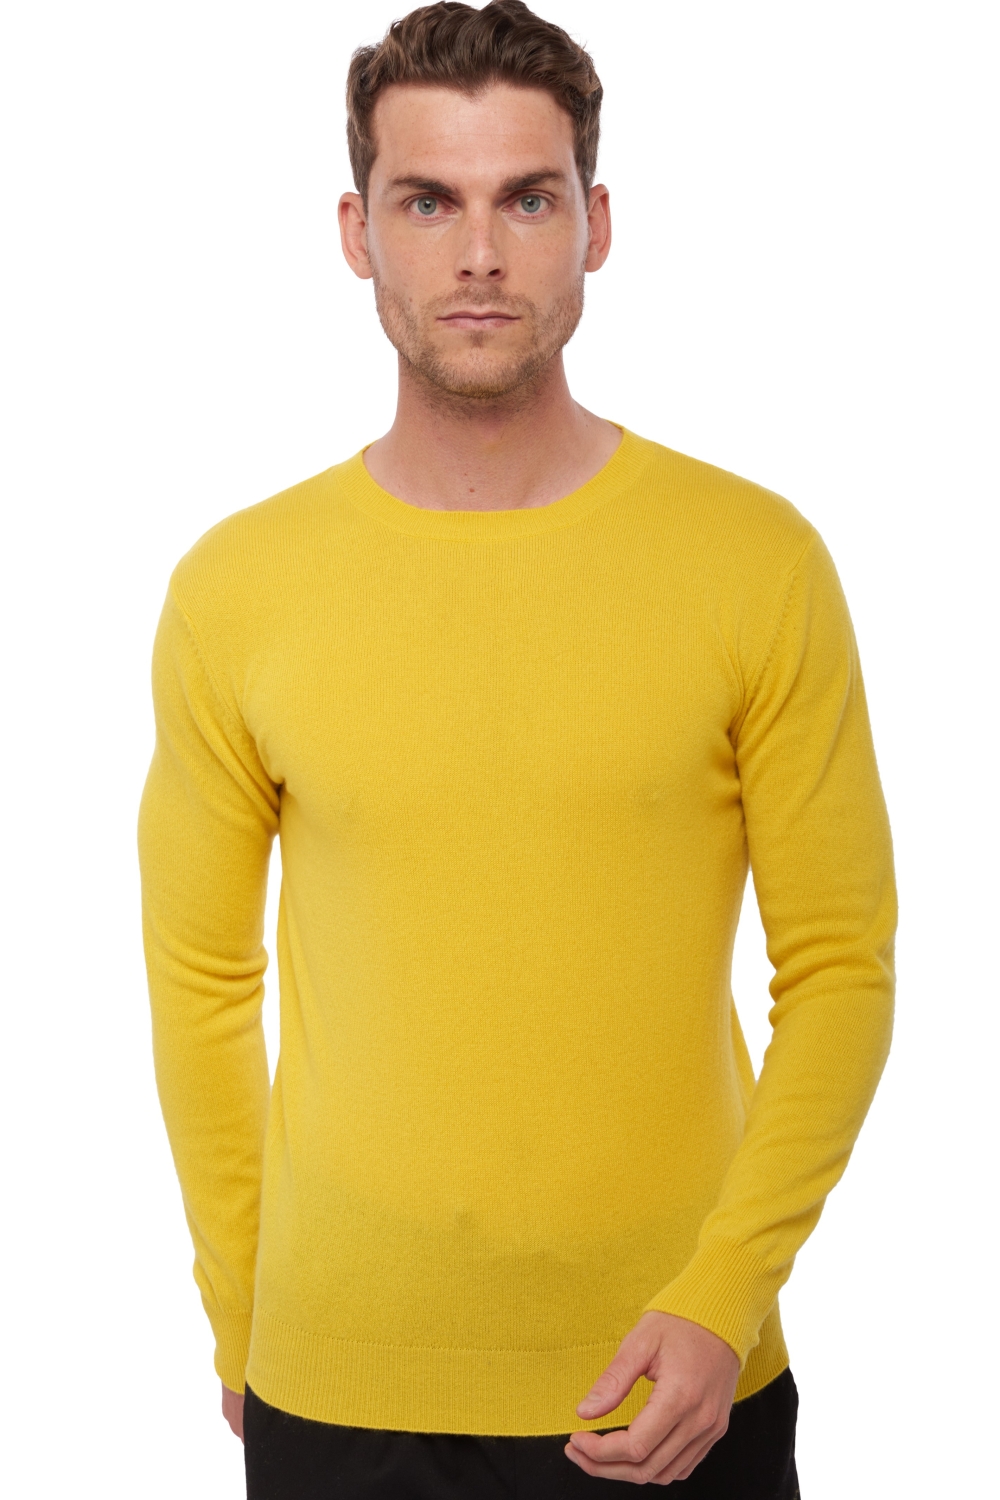 Cashmere men low prices tao first sunny yellow xl